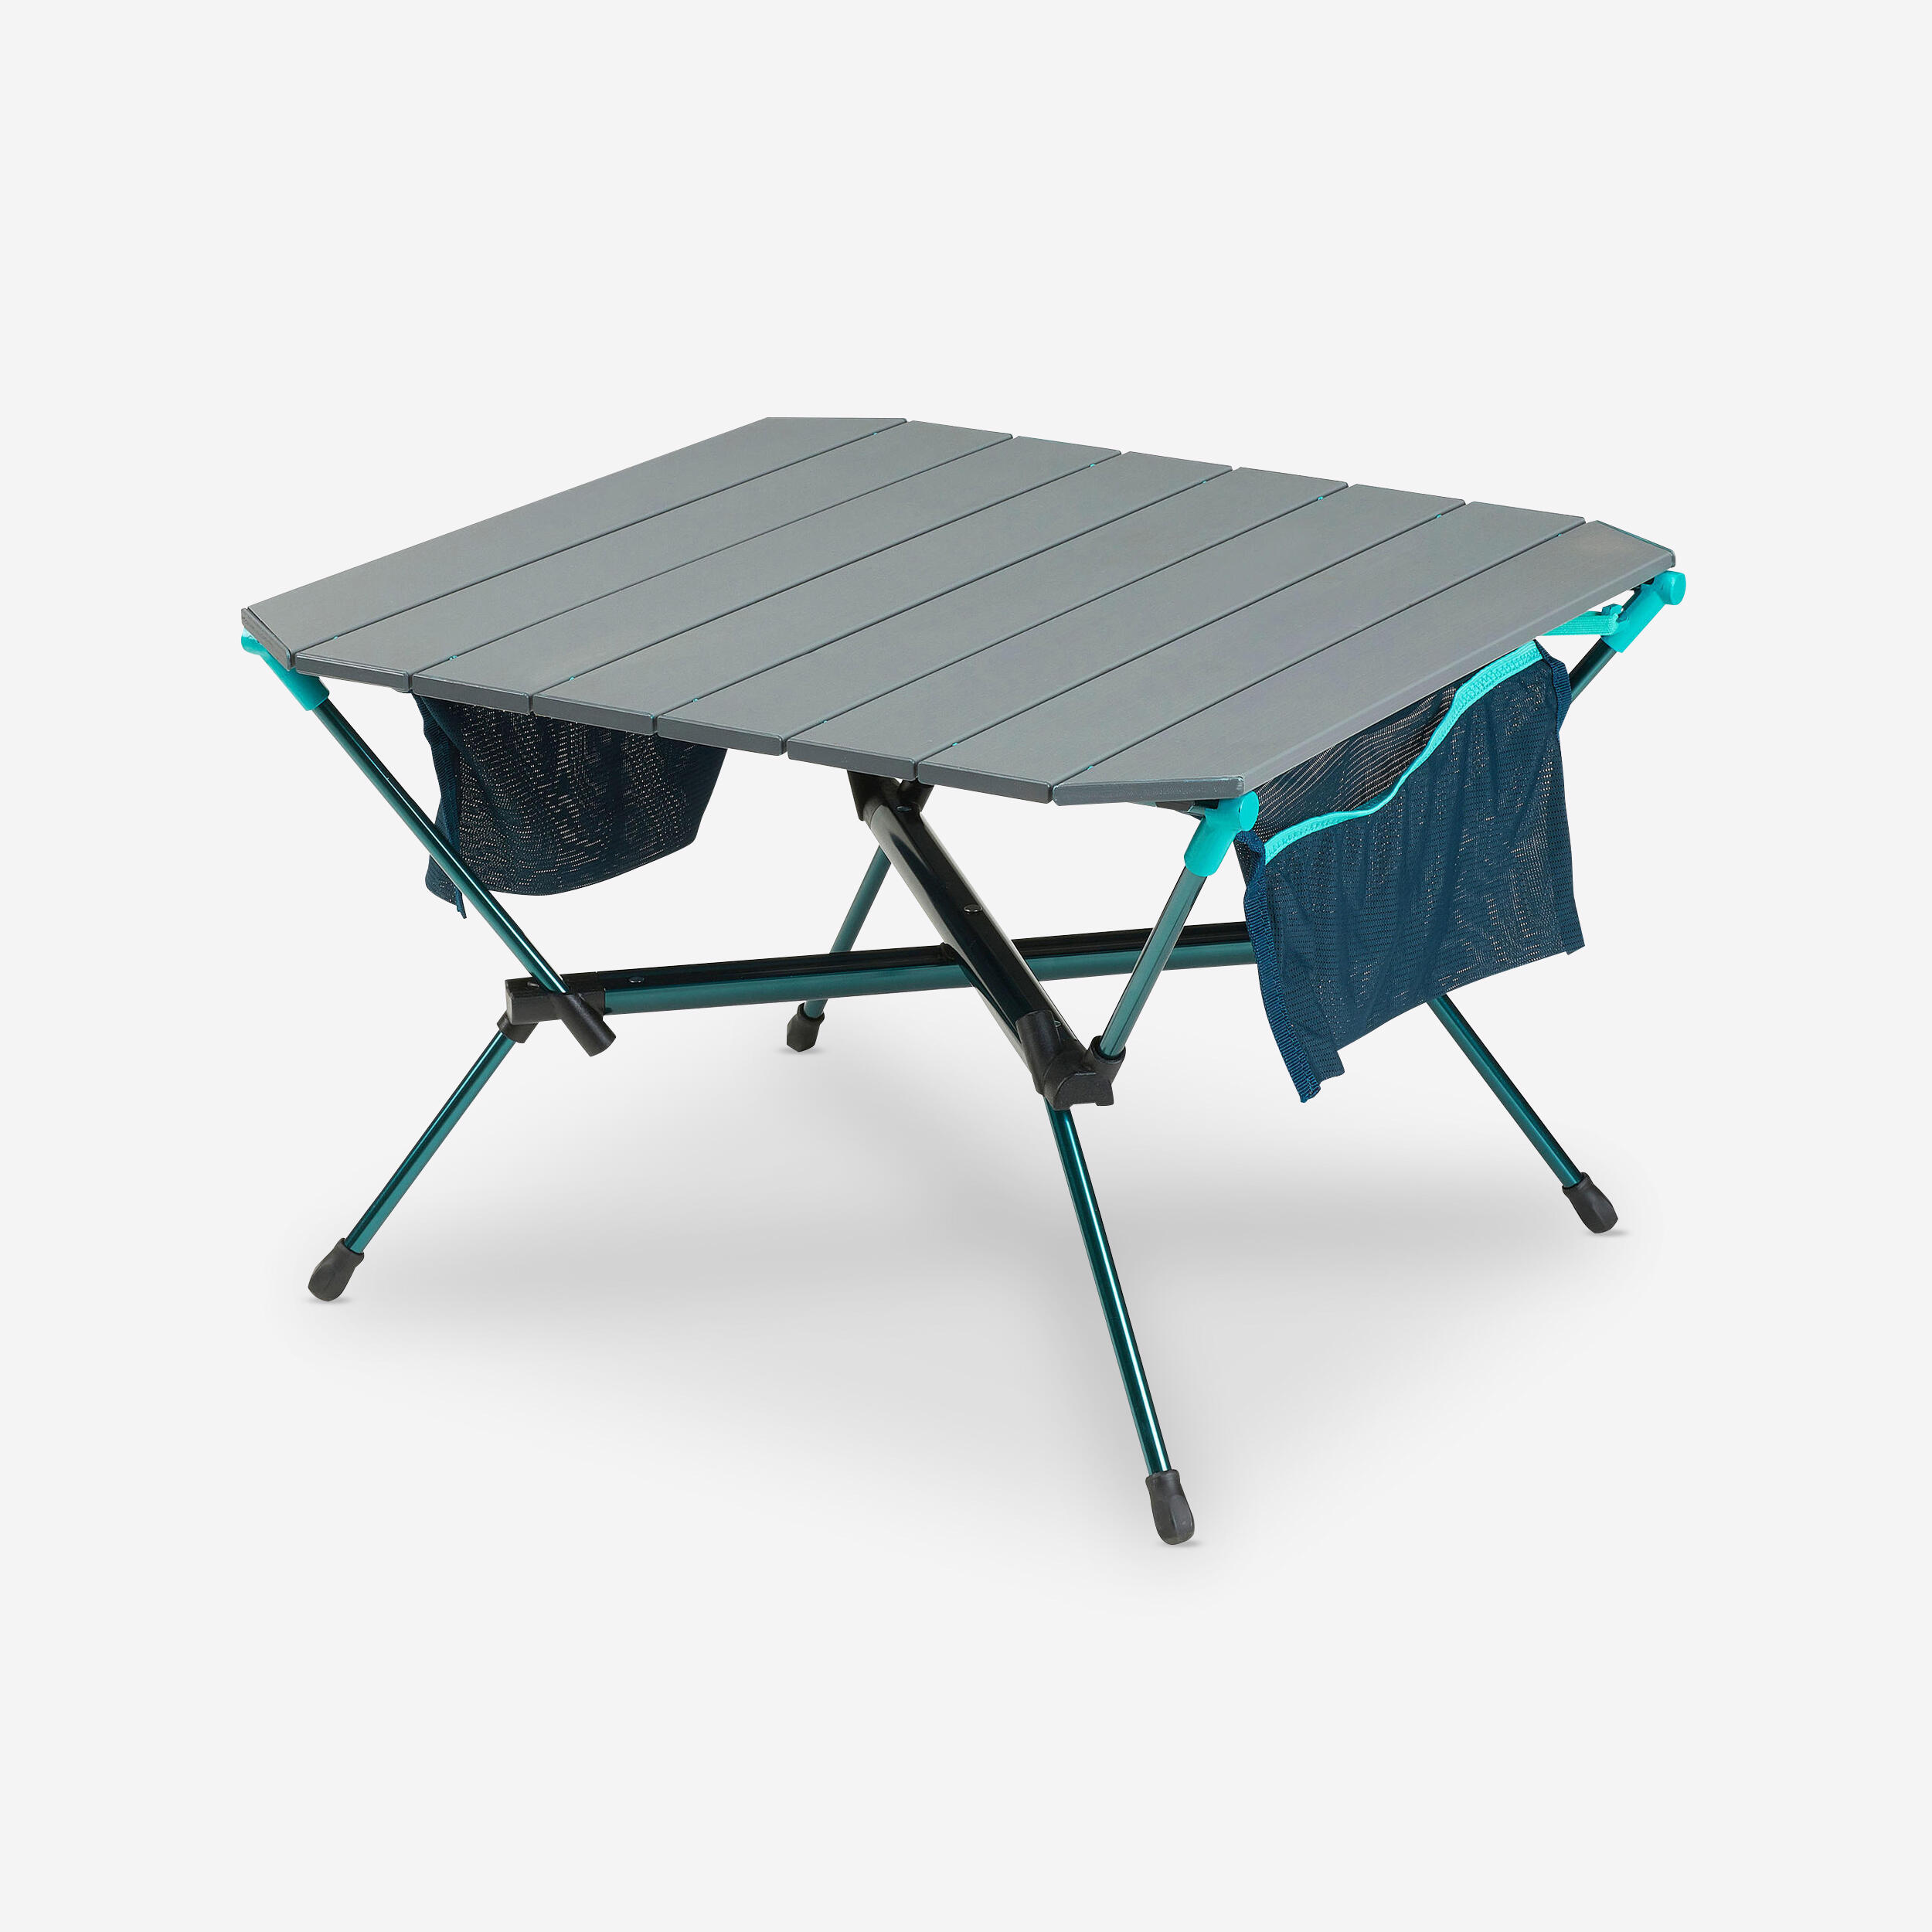 Folding Camping Table - MH 500